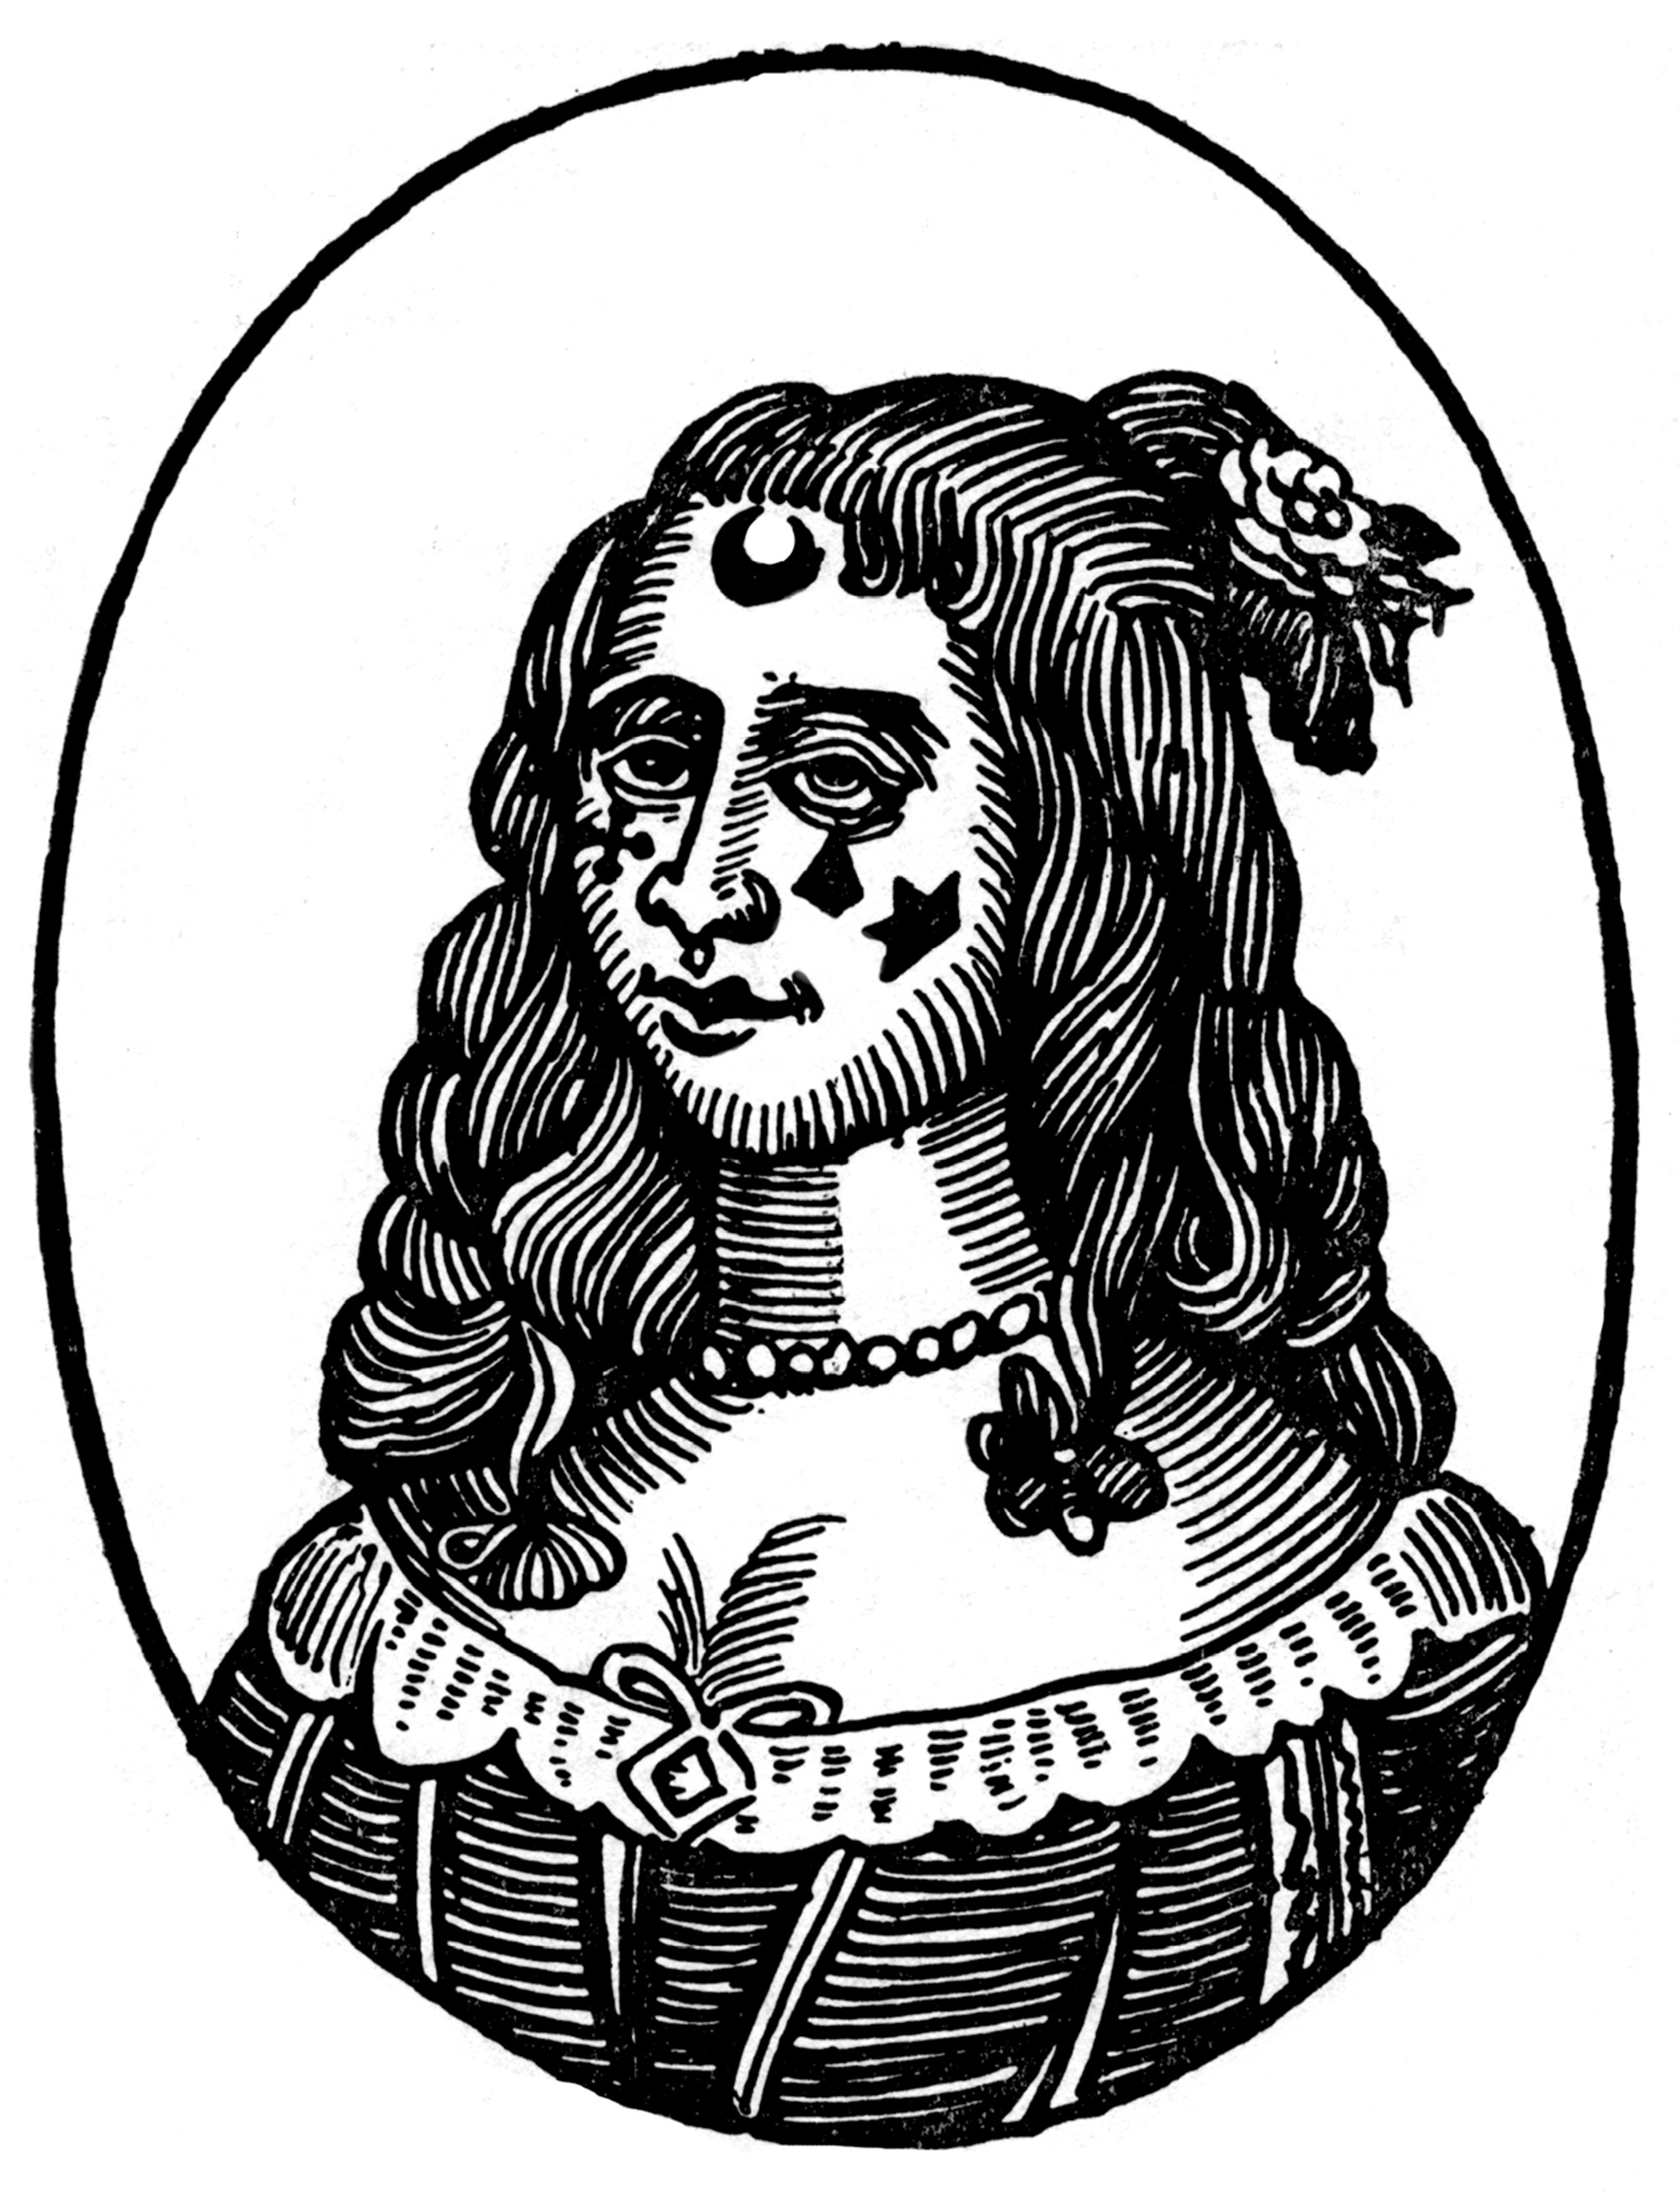 A copy of a woodcut originally made in circa sixteen eighty, depicting a woman with geometric shapes marked on her face and neck. The image is reproduced from the seventh volume of J. Woodfall Ebsworth’s eighteen ninety work titled “The Roxburghe Ballads.” 